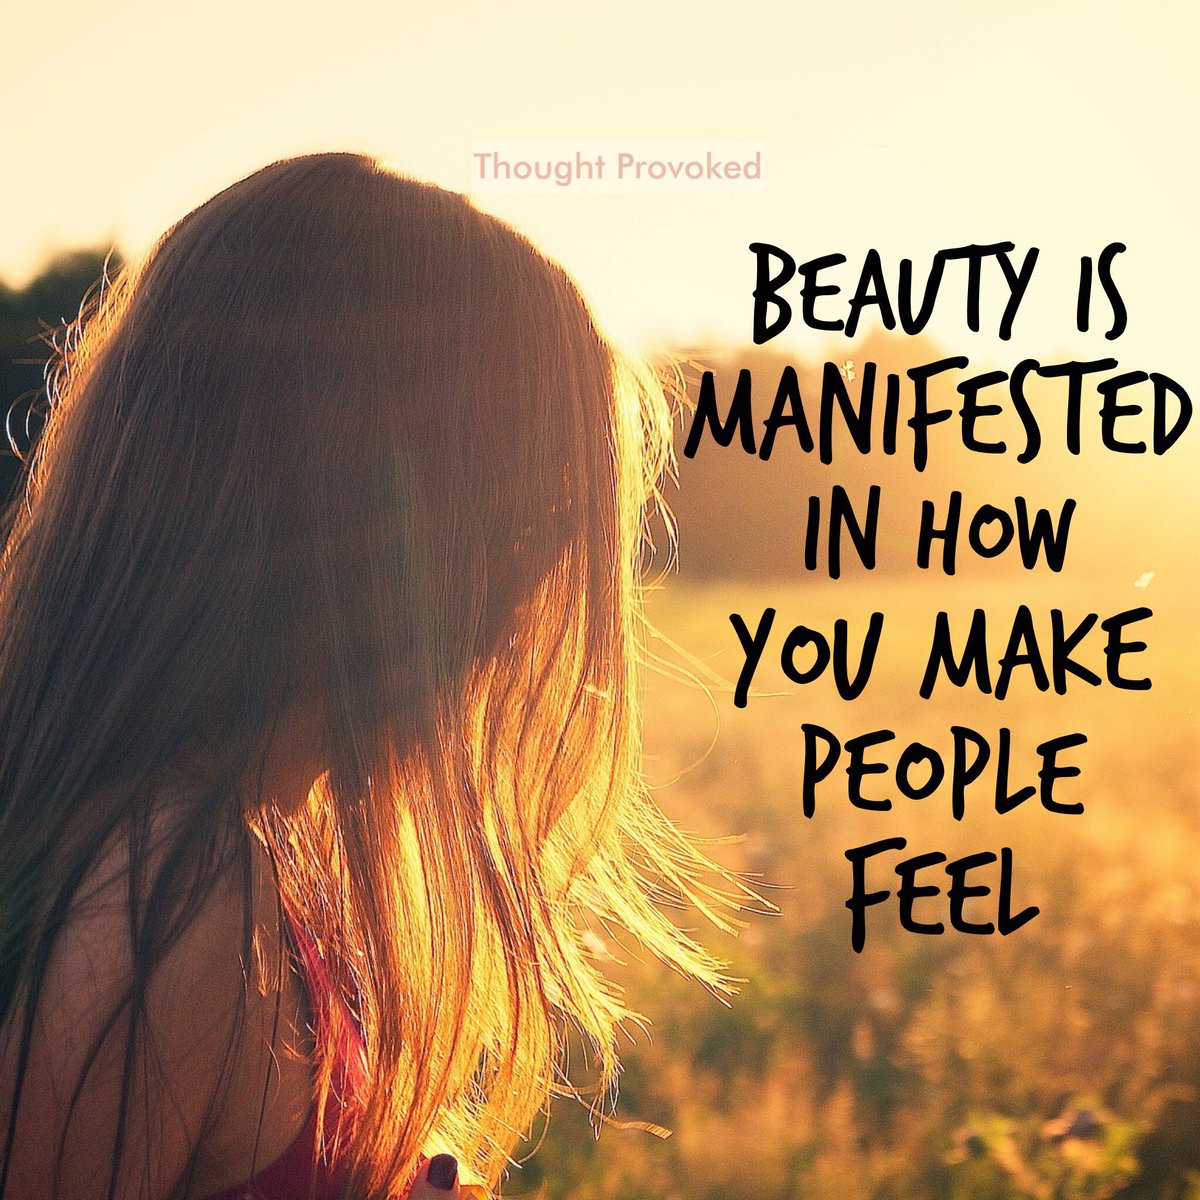 Beauty is manifested in how you make people feel. #quote #IQRTG